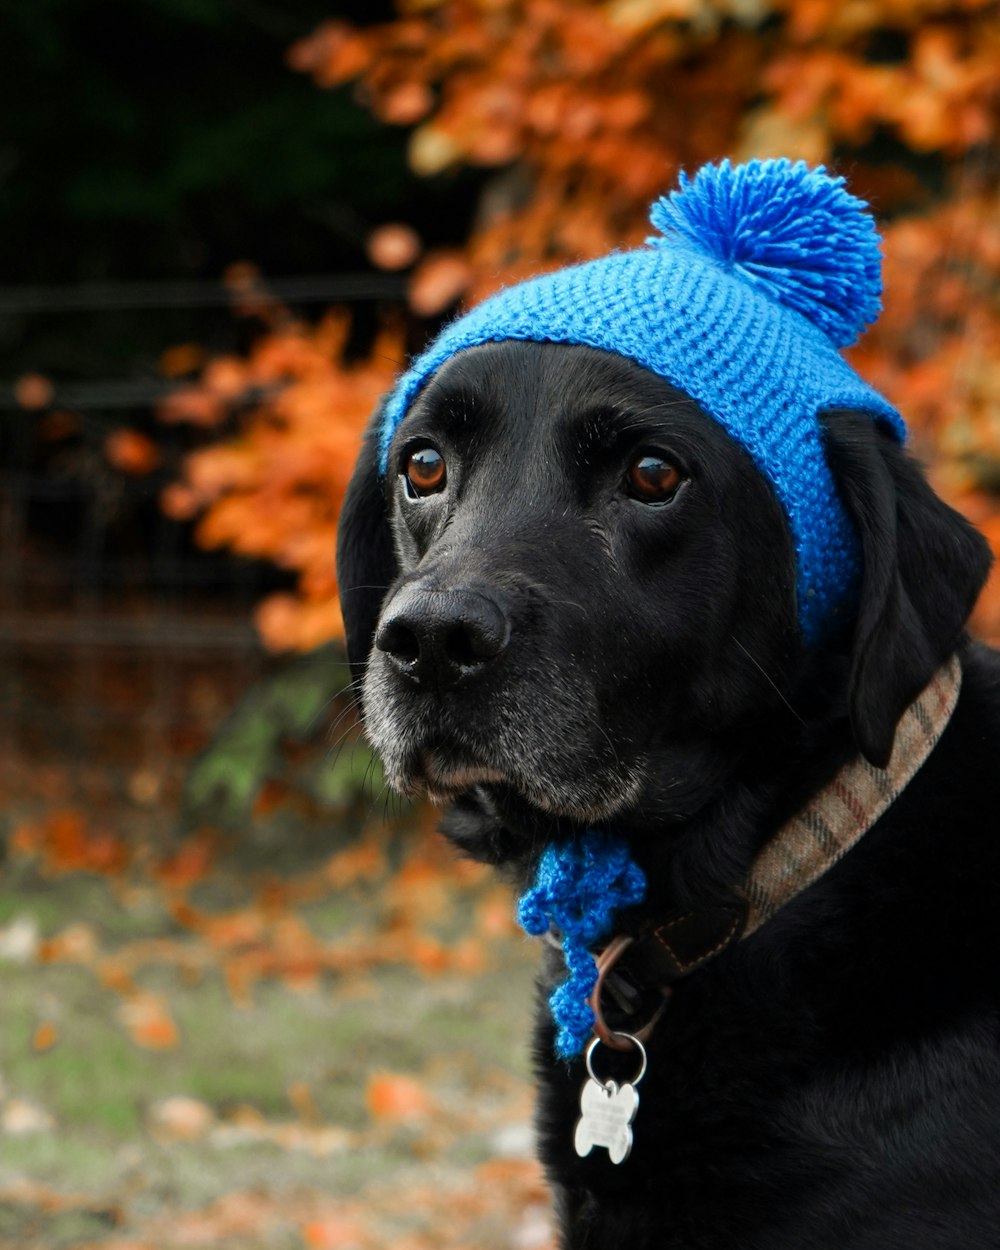 a black dog wearing a blue knitted hat